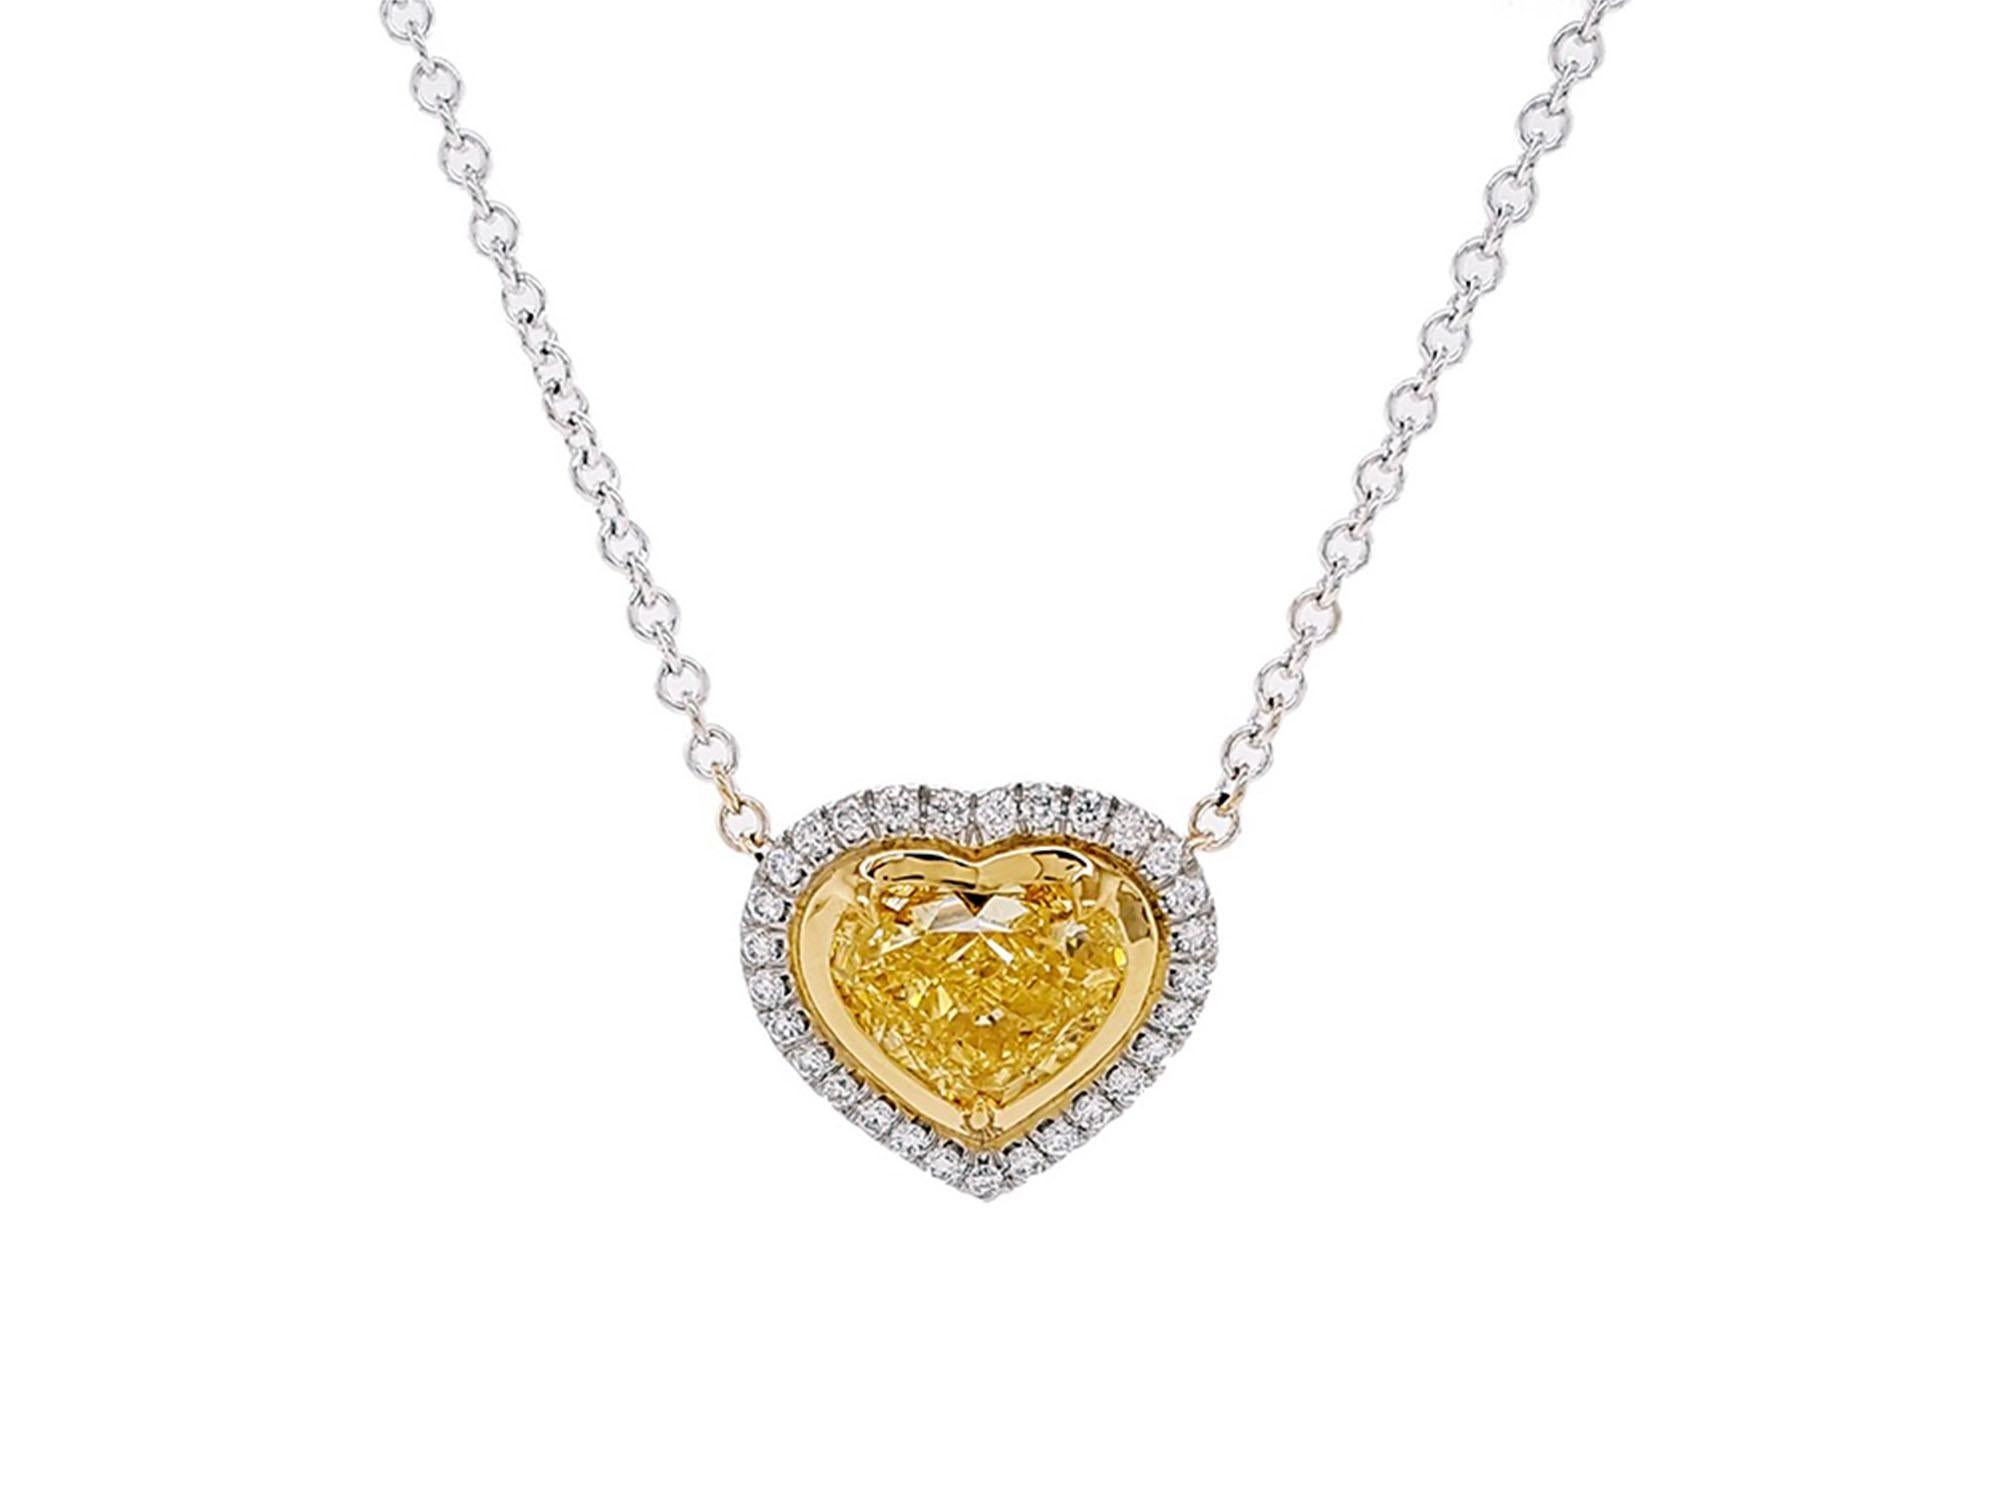 2 Carat Heart Cut, Fancy Intense Yellow Diamond Halo Pendant Necklace, Platinum. In New Condition For Sale In New York, NY